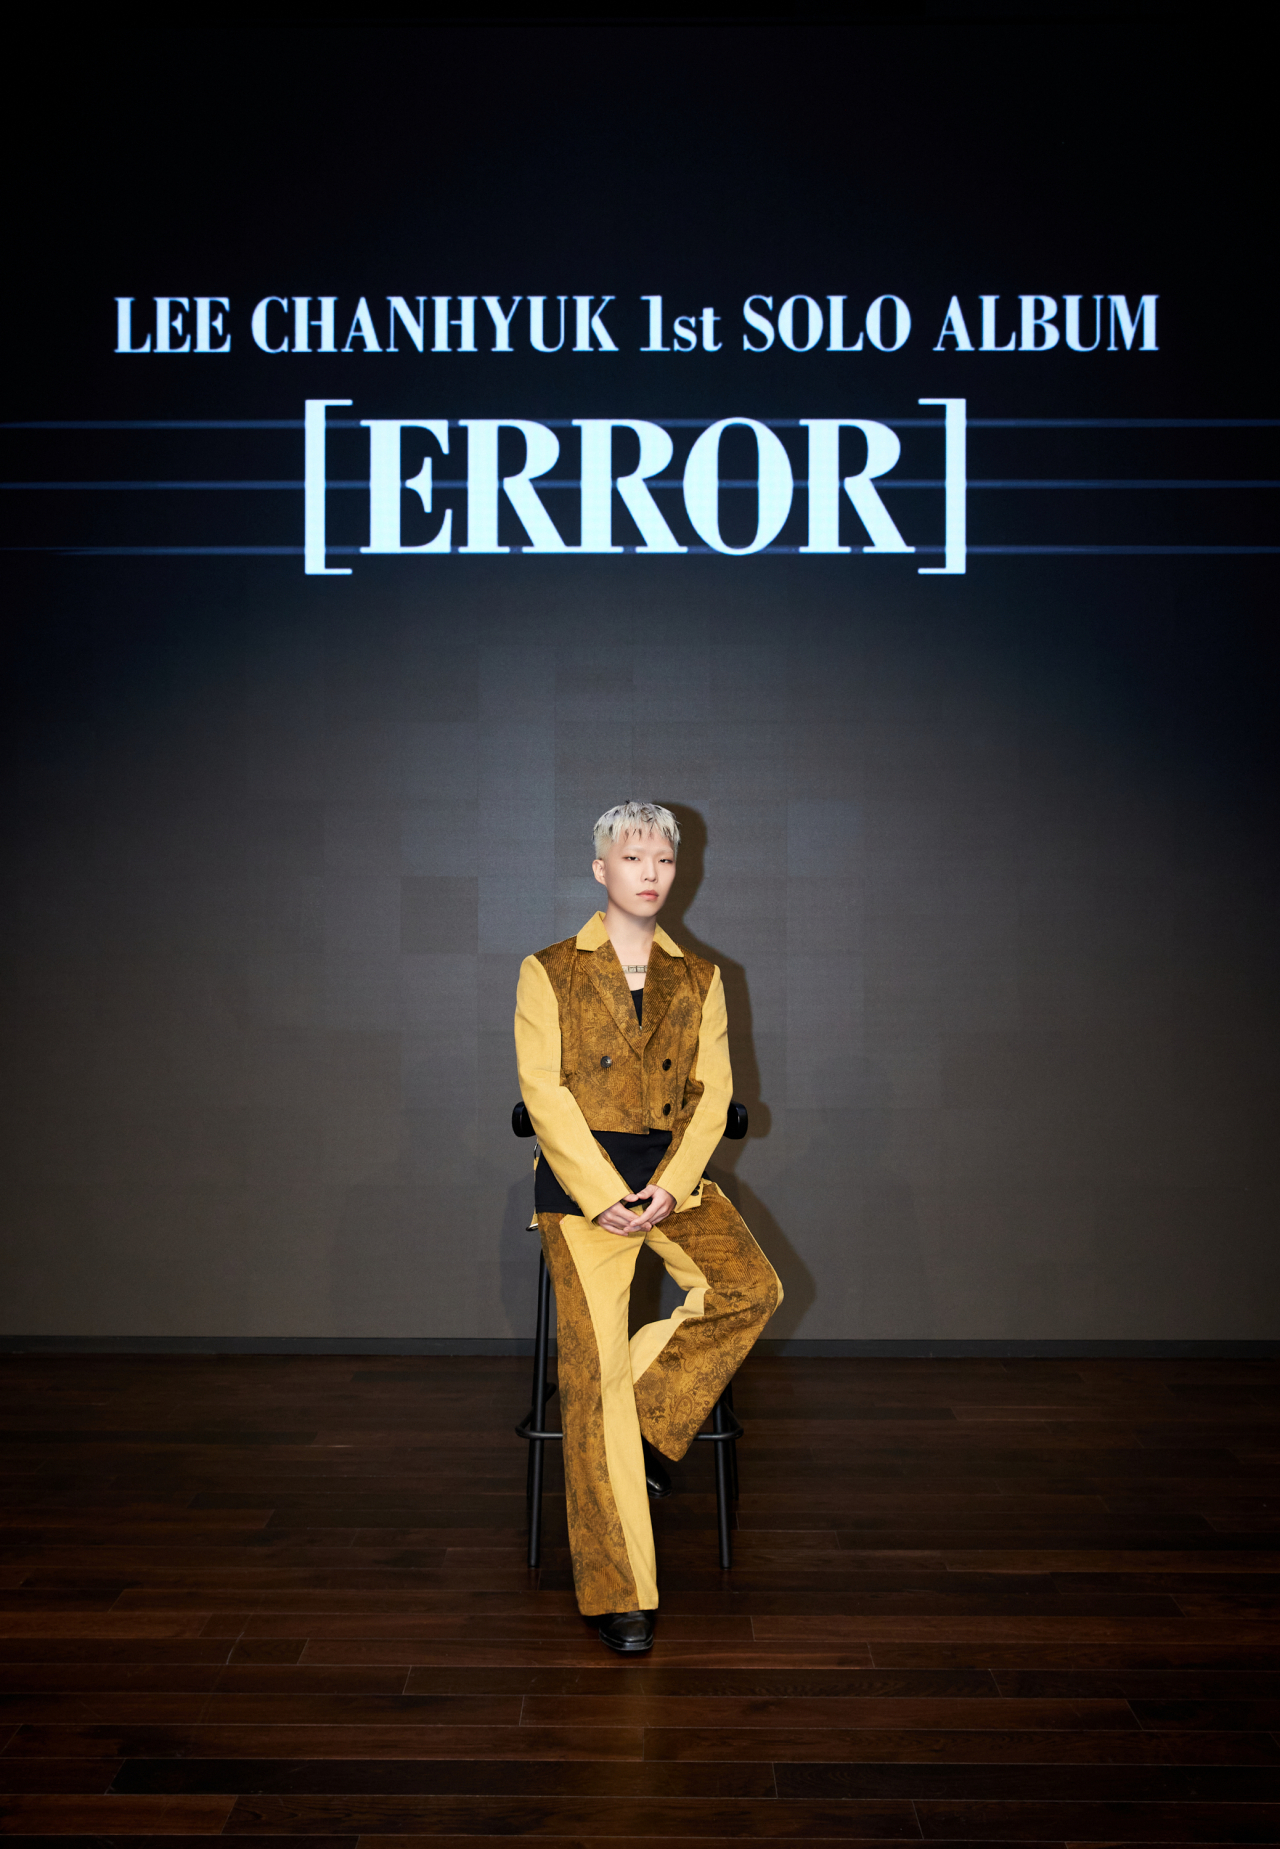 Lee Chan-hyuk says death is the beginning of his new musical life through  first solo album 'Error'